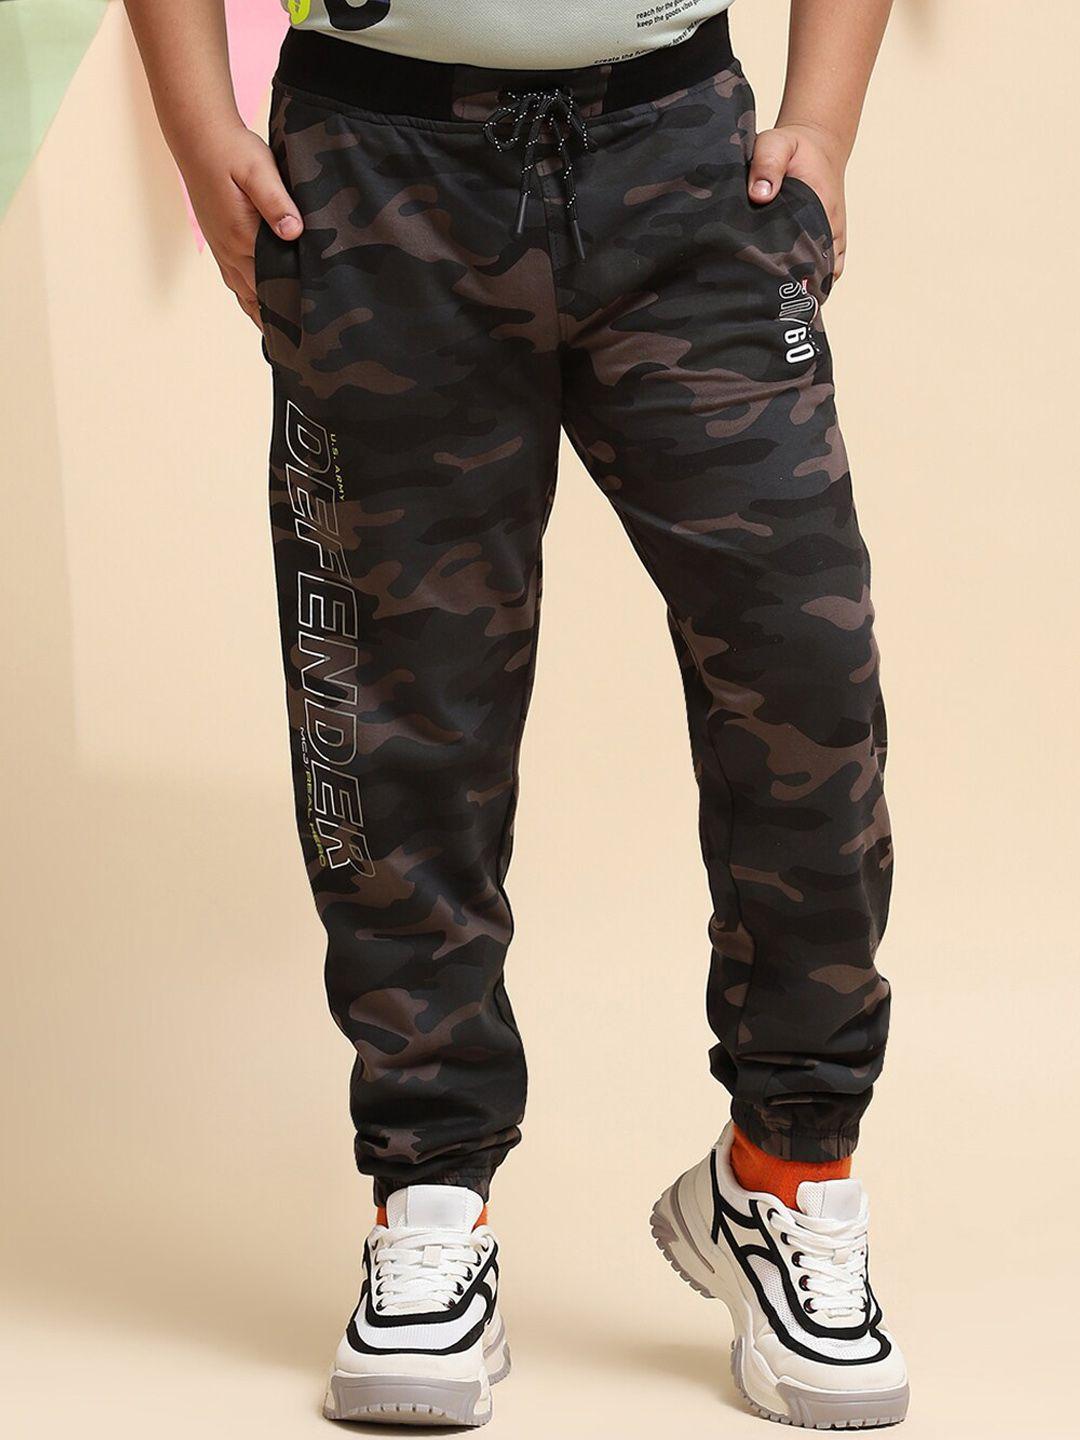 Monte Carlo Boys Mid-Rise Camouflage Printed Casual Cotton Joggers